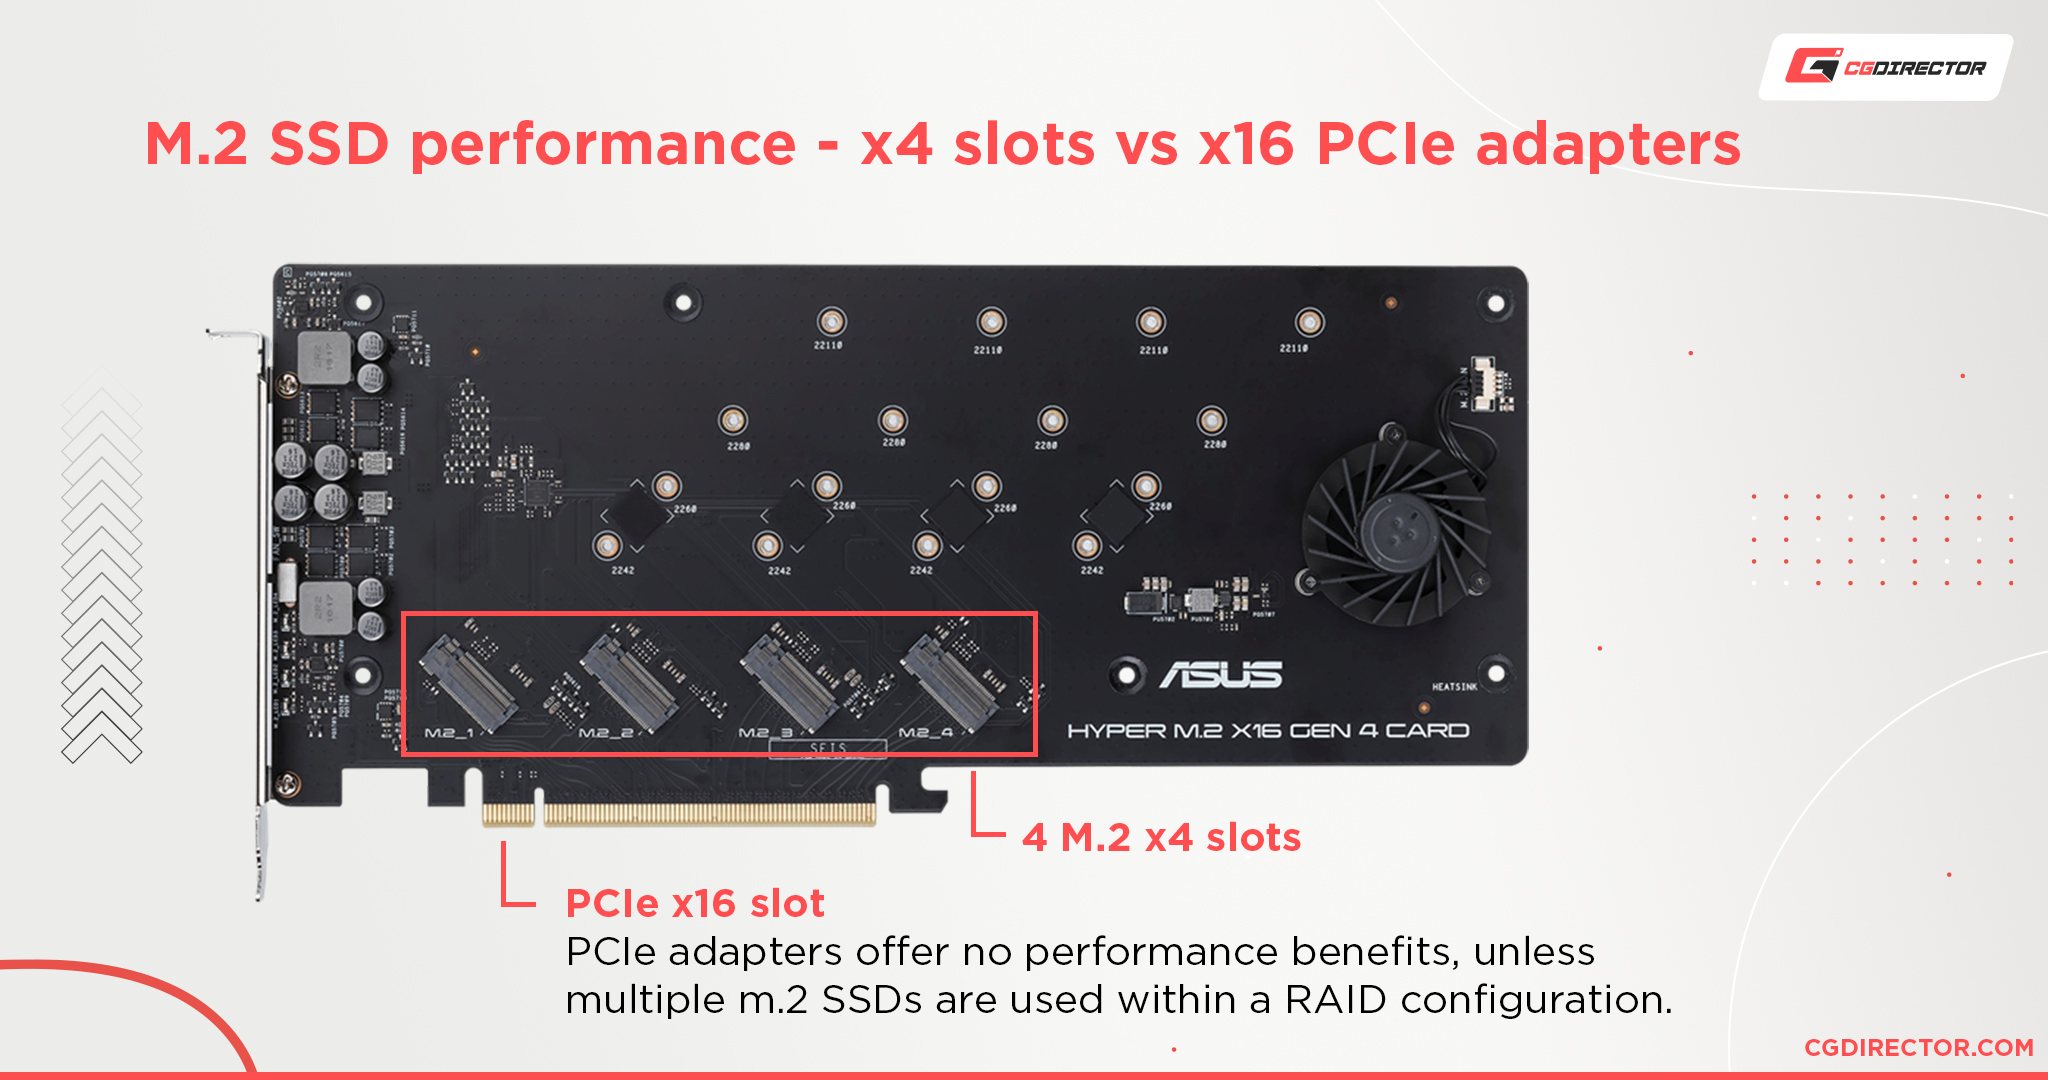 Do PCIe adapters offer performance benefits